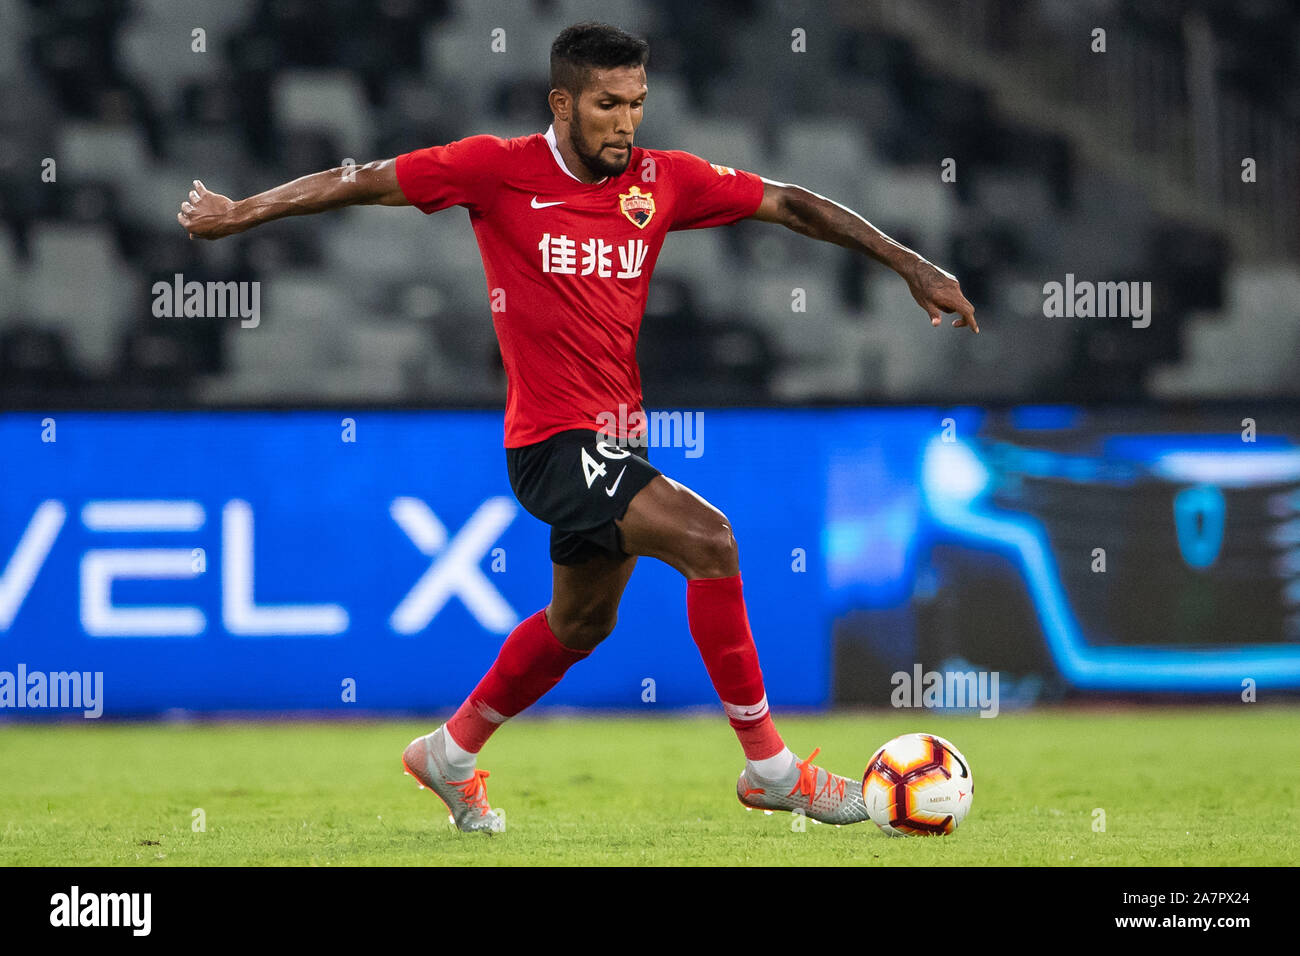 Brazilian-born Portuguese football player Dyego Sousa of Shenzhen F.C., chases after the ball in the 22nd round match during the 2019 Chinese Football Stock Photo